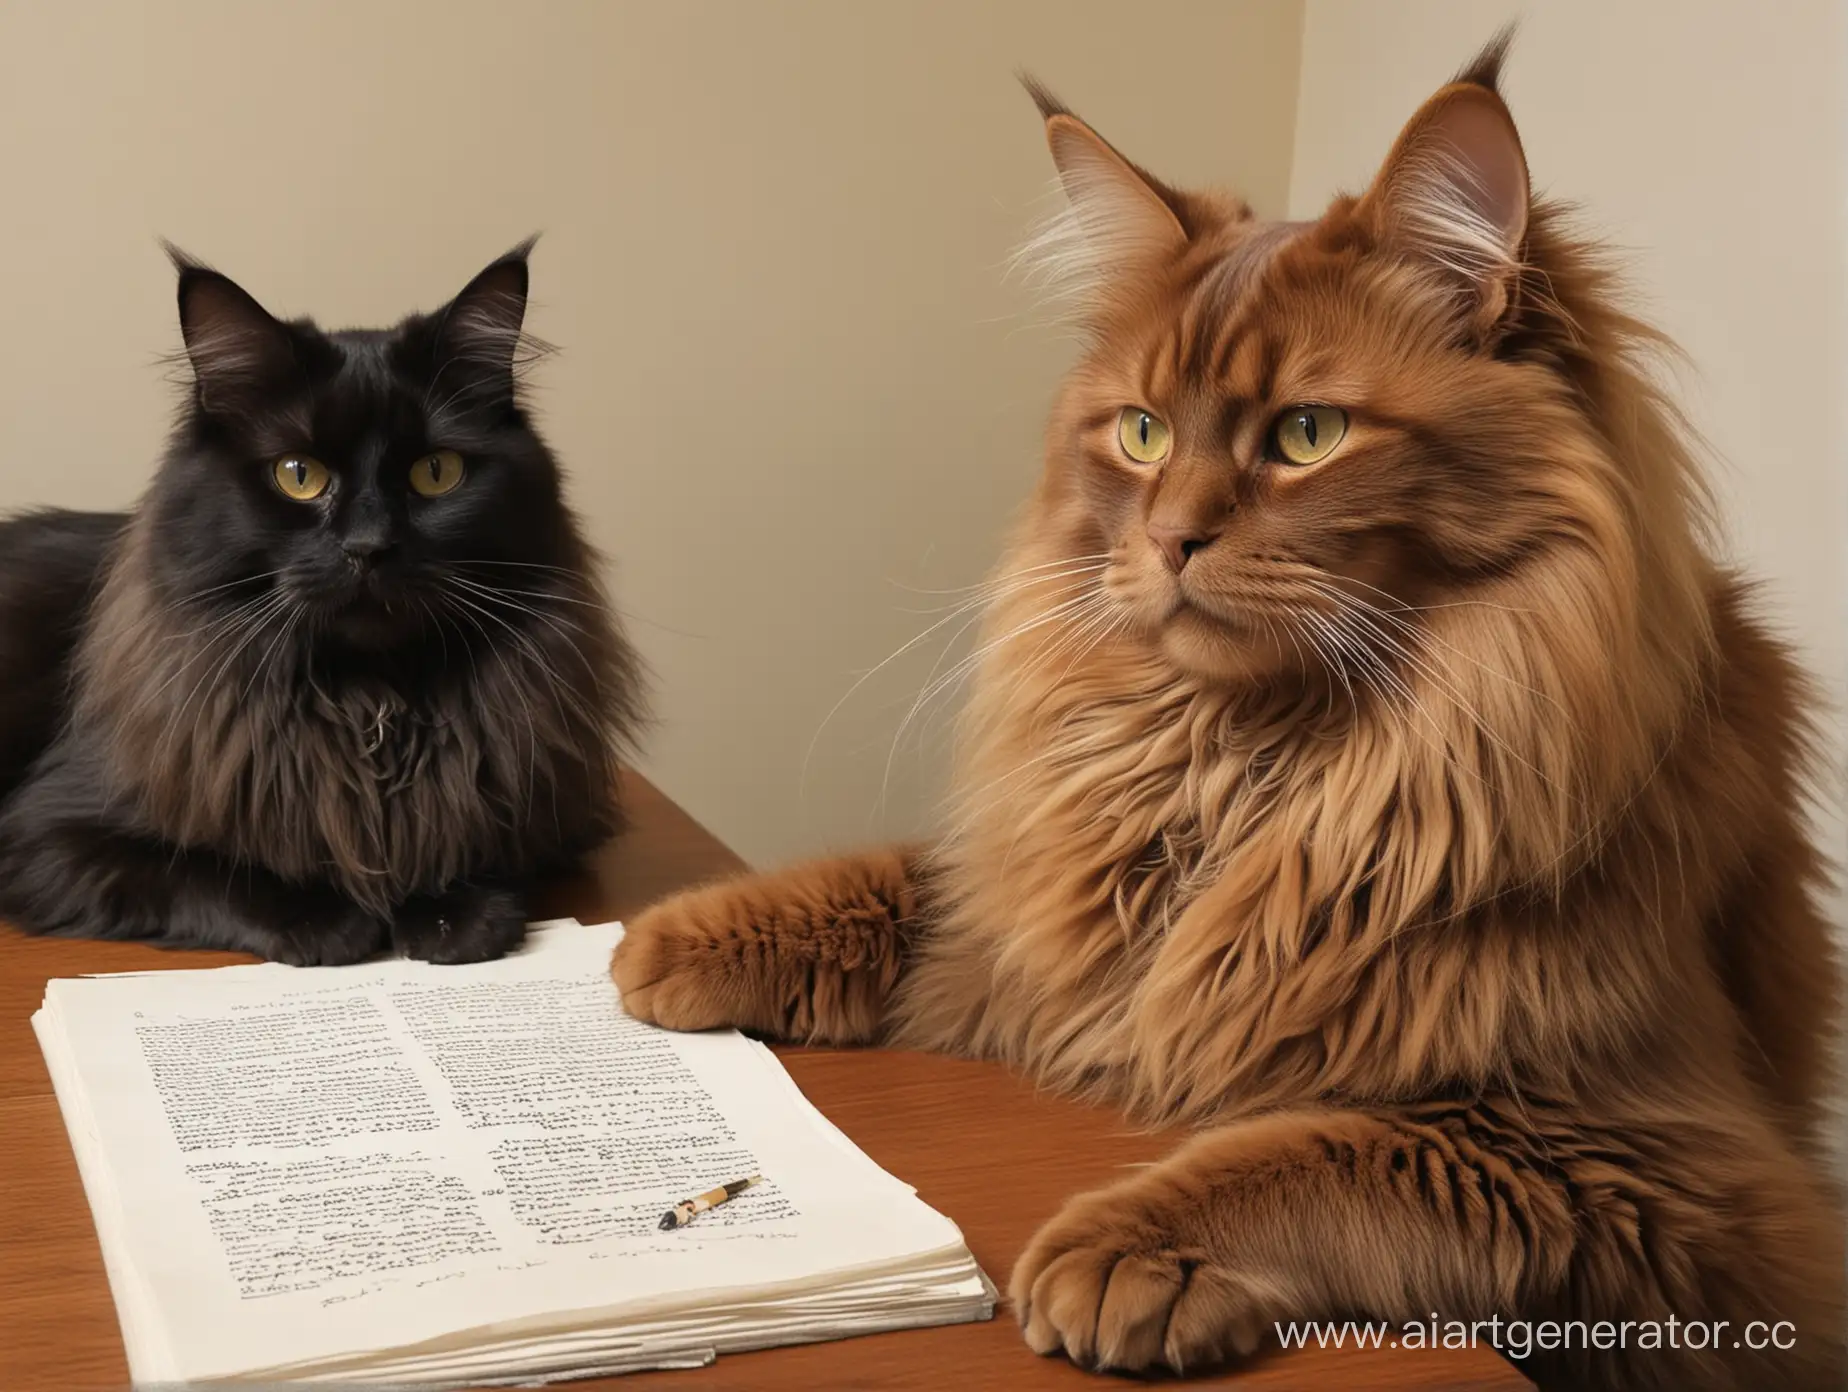 1 fluffy black cat; 1 spectacled red Maine Coon working on a manuscript